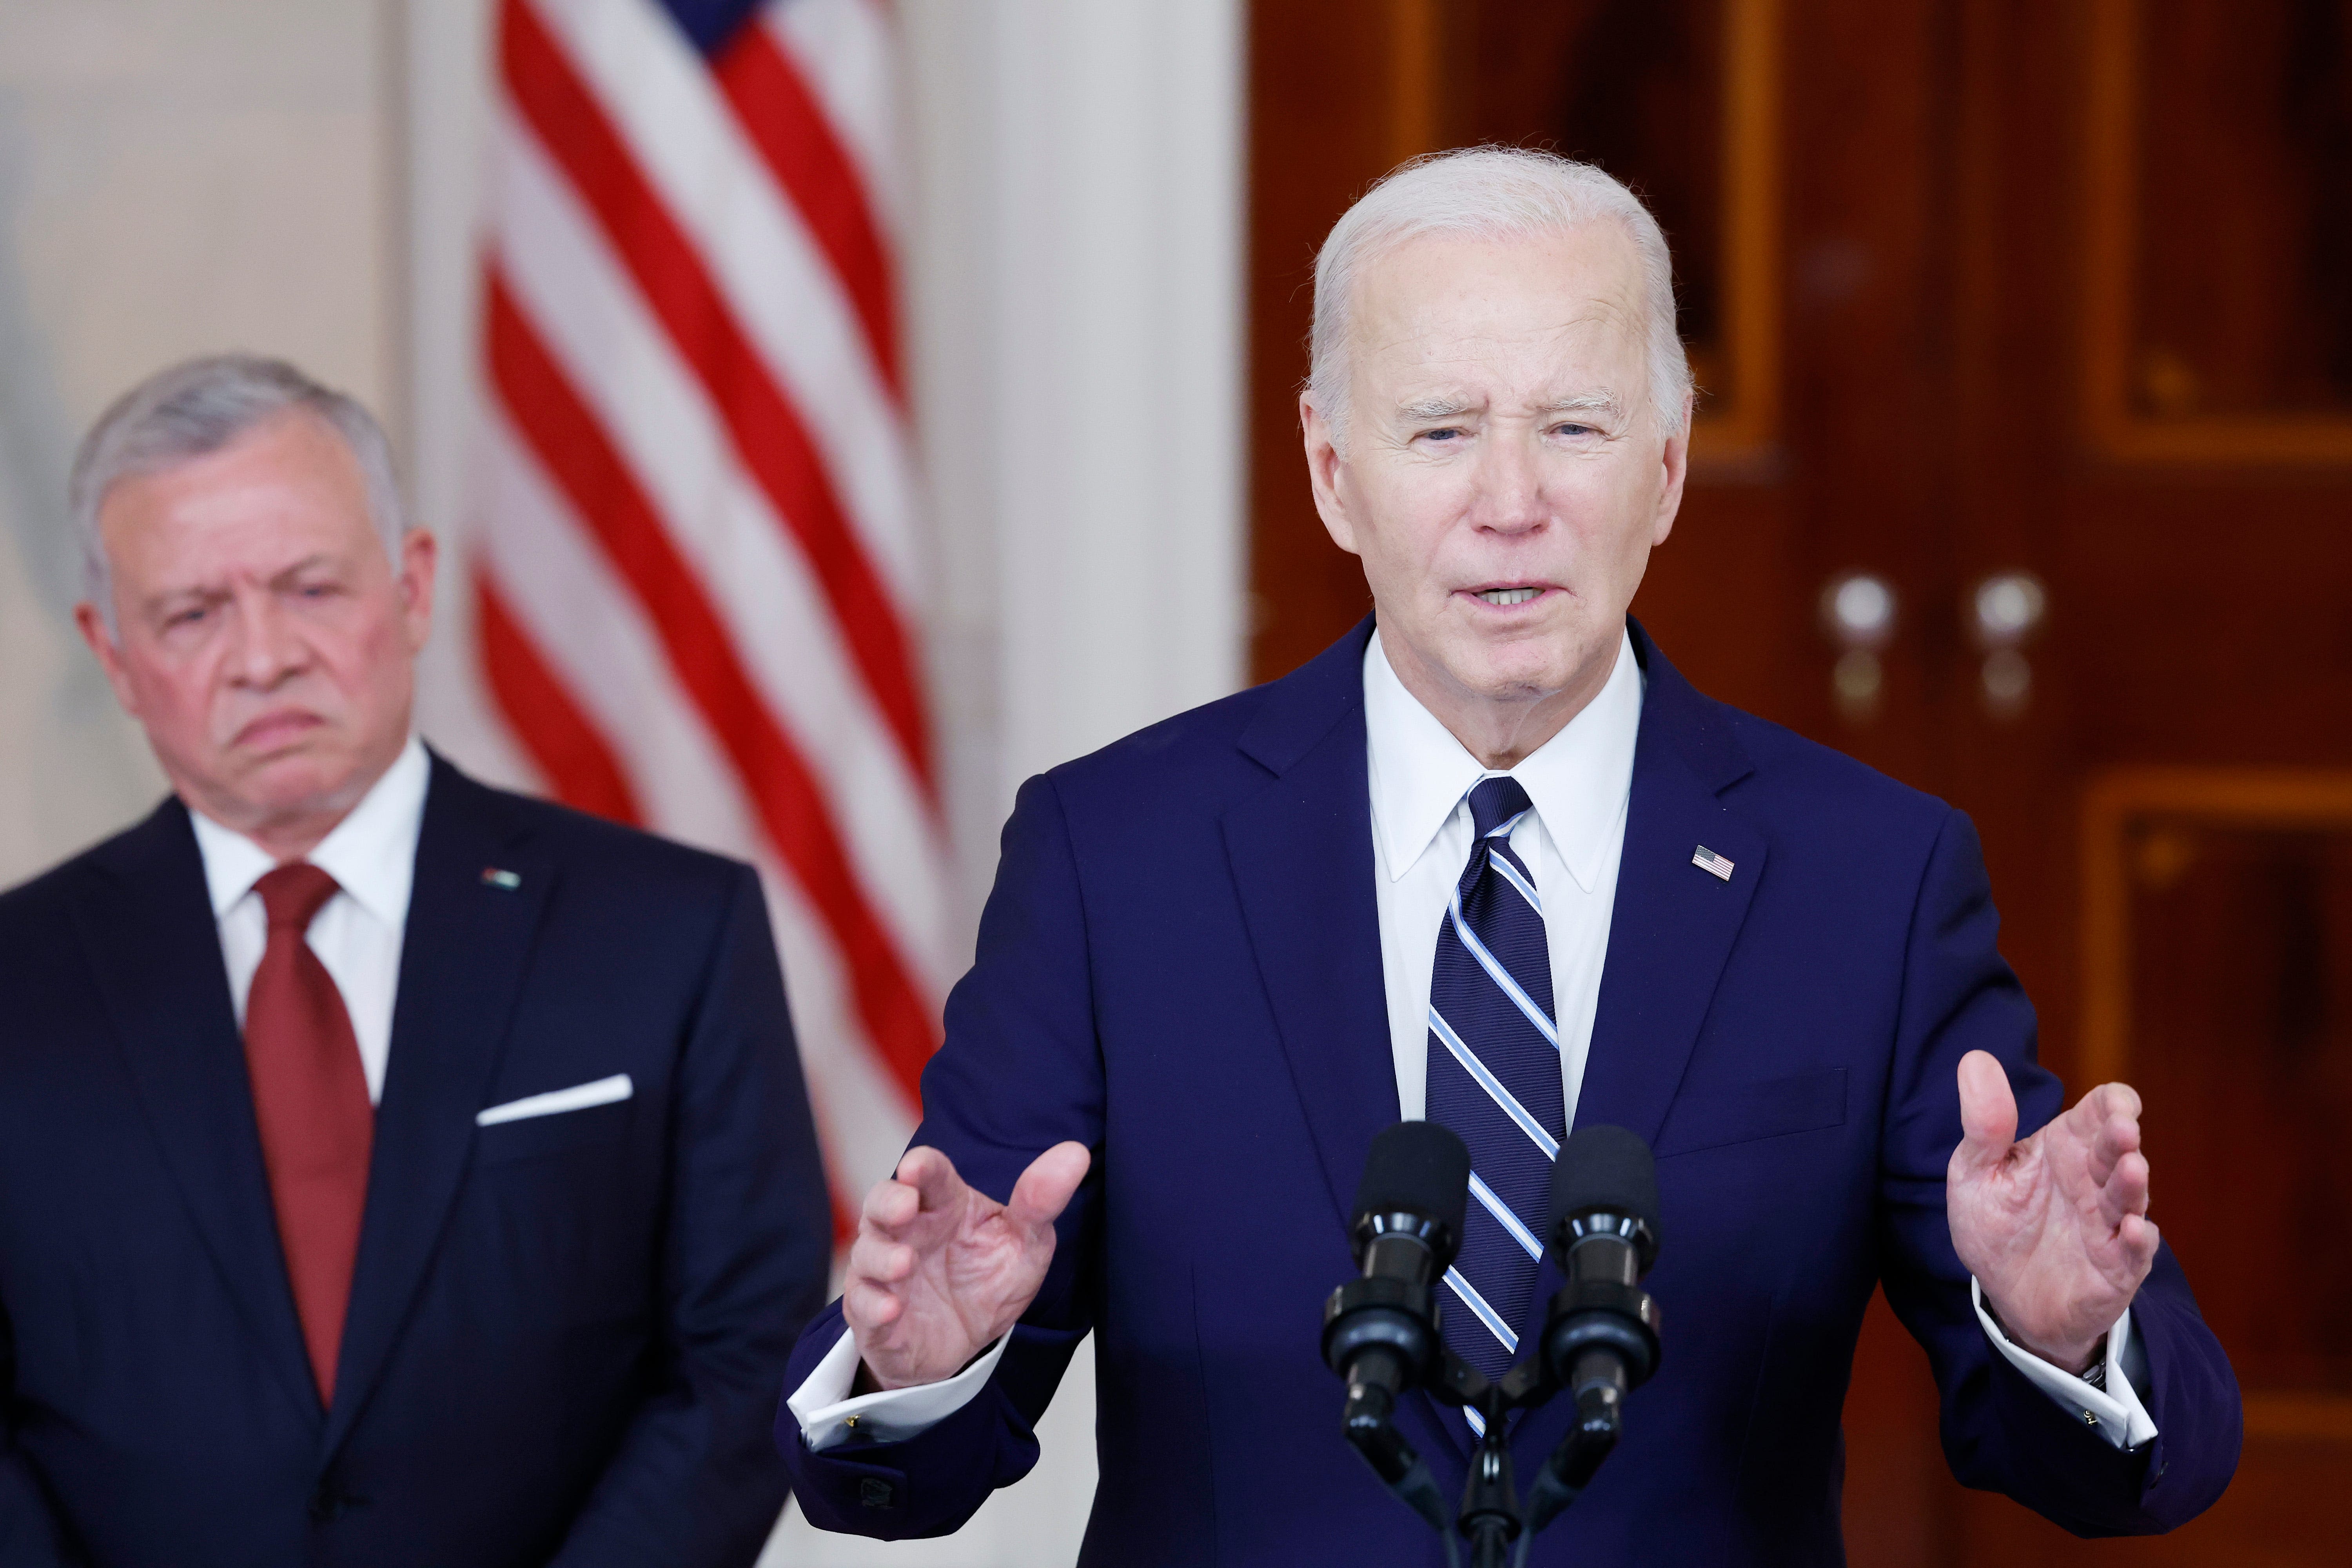 Biden's Holocaust memorial speech holds key to his future as protests, antisemitism rage